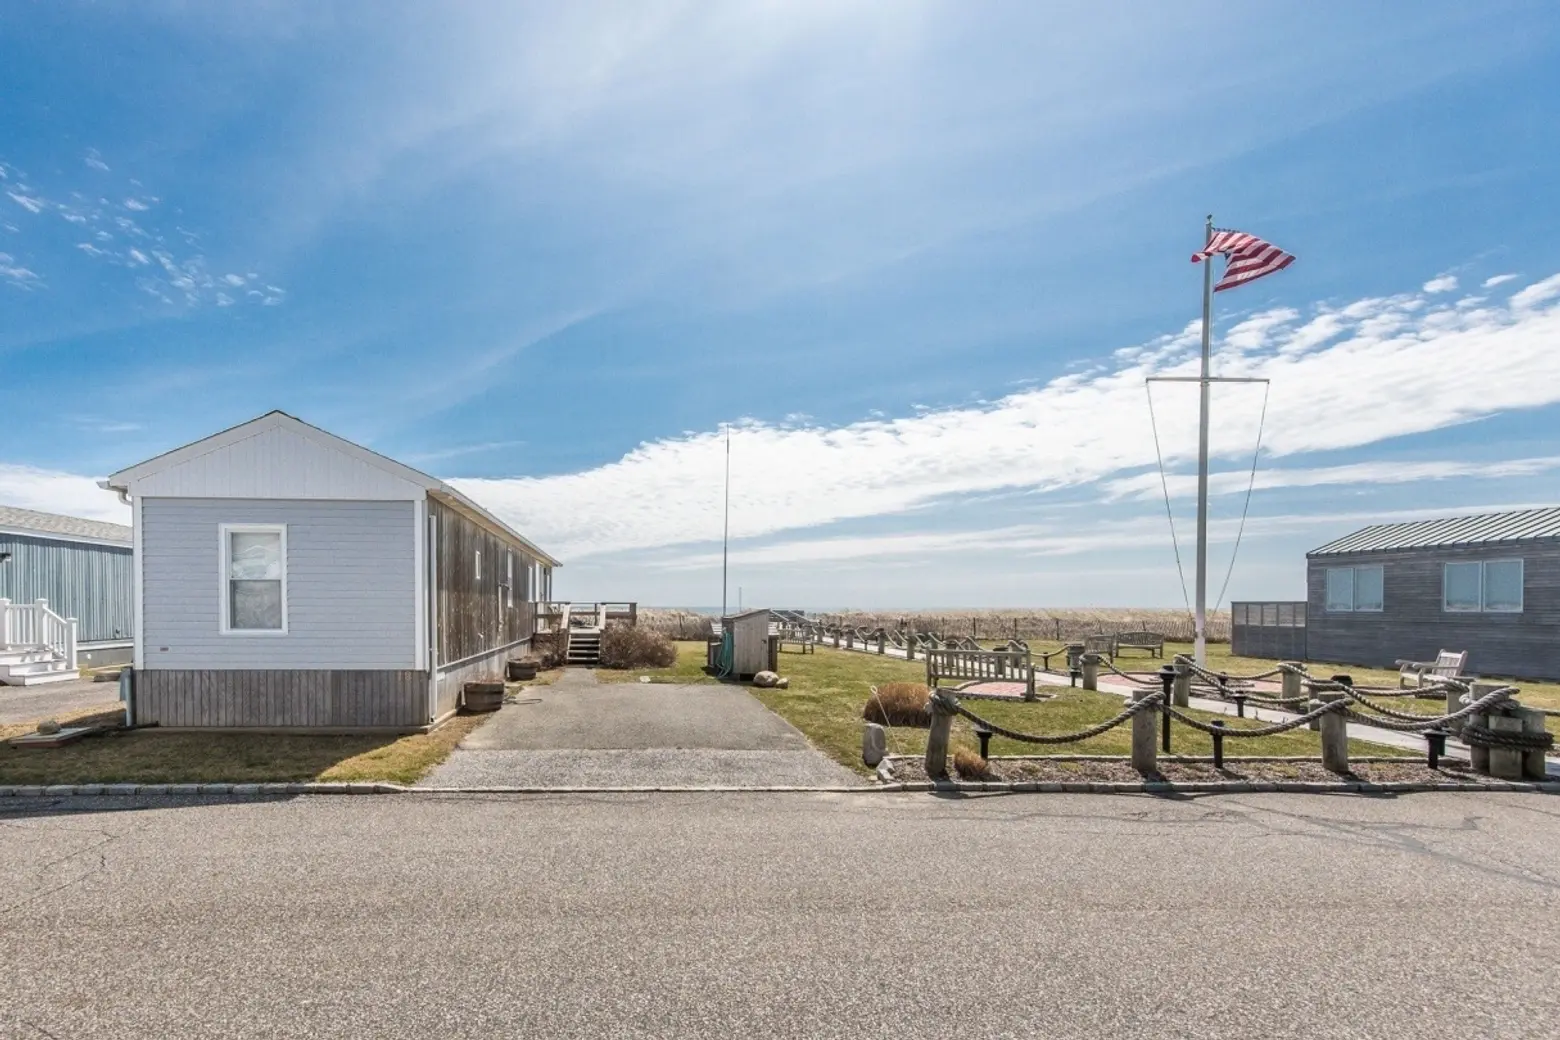 Billionaires are clamoring to move into this Montauk trailer park